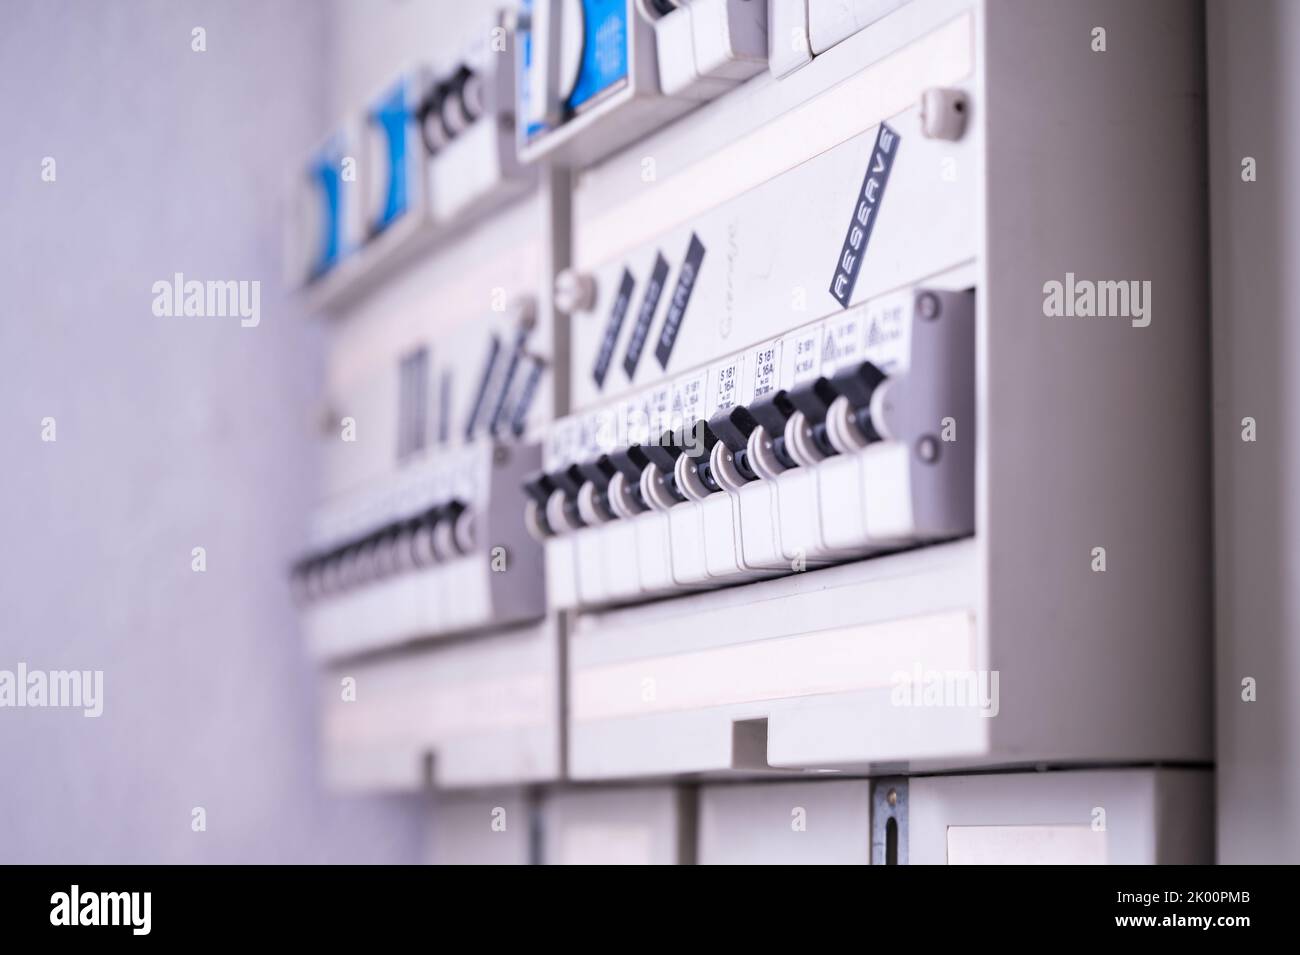 Fuse box of an electrical installation with fault circuit breakers for electrical safety Stock Photo